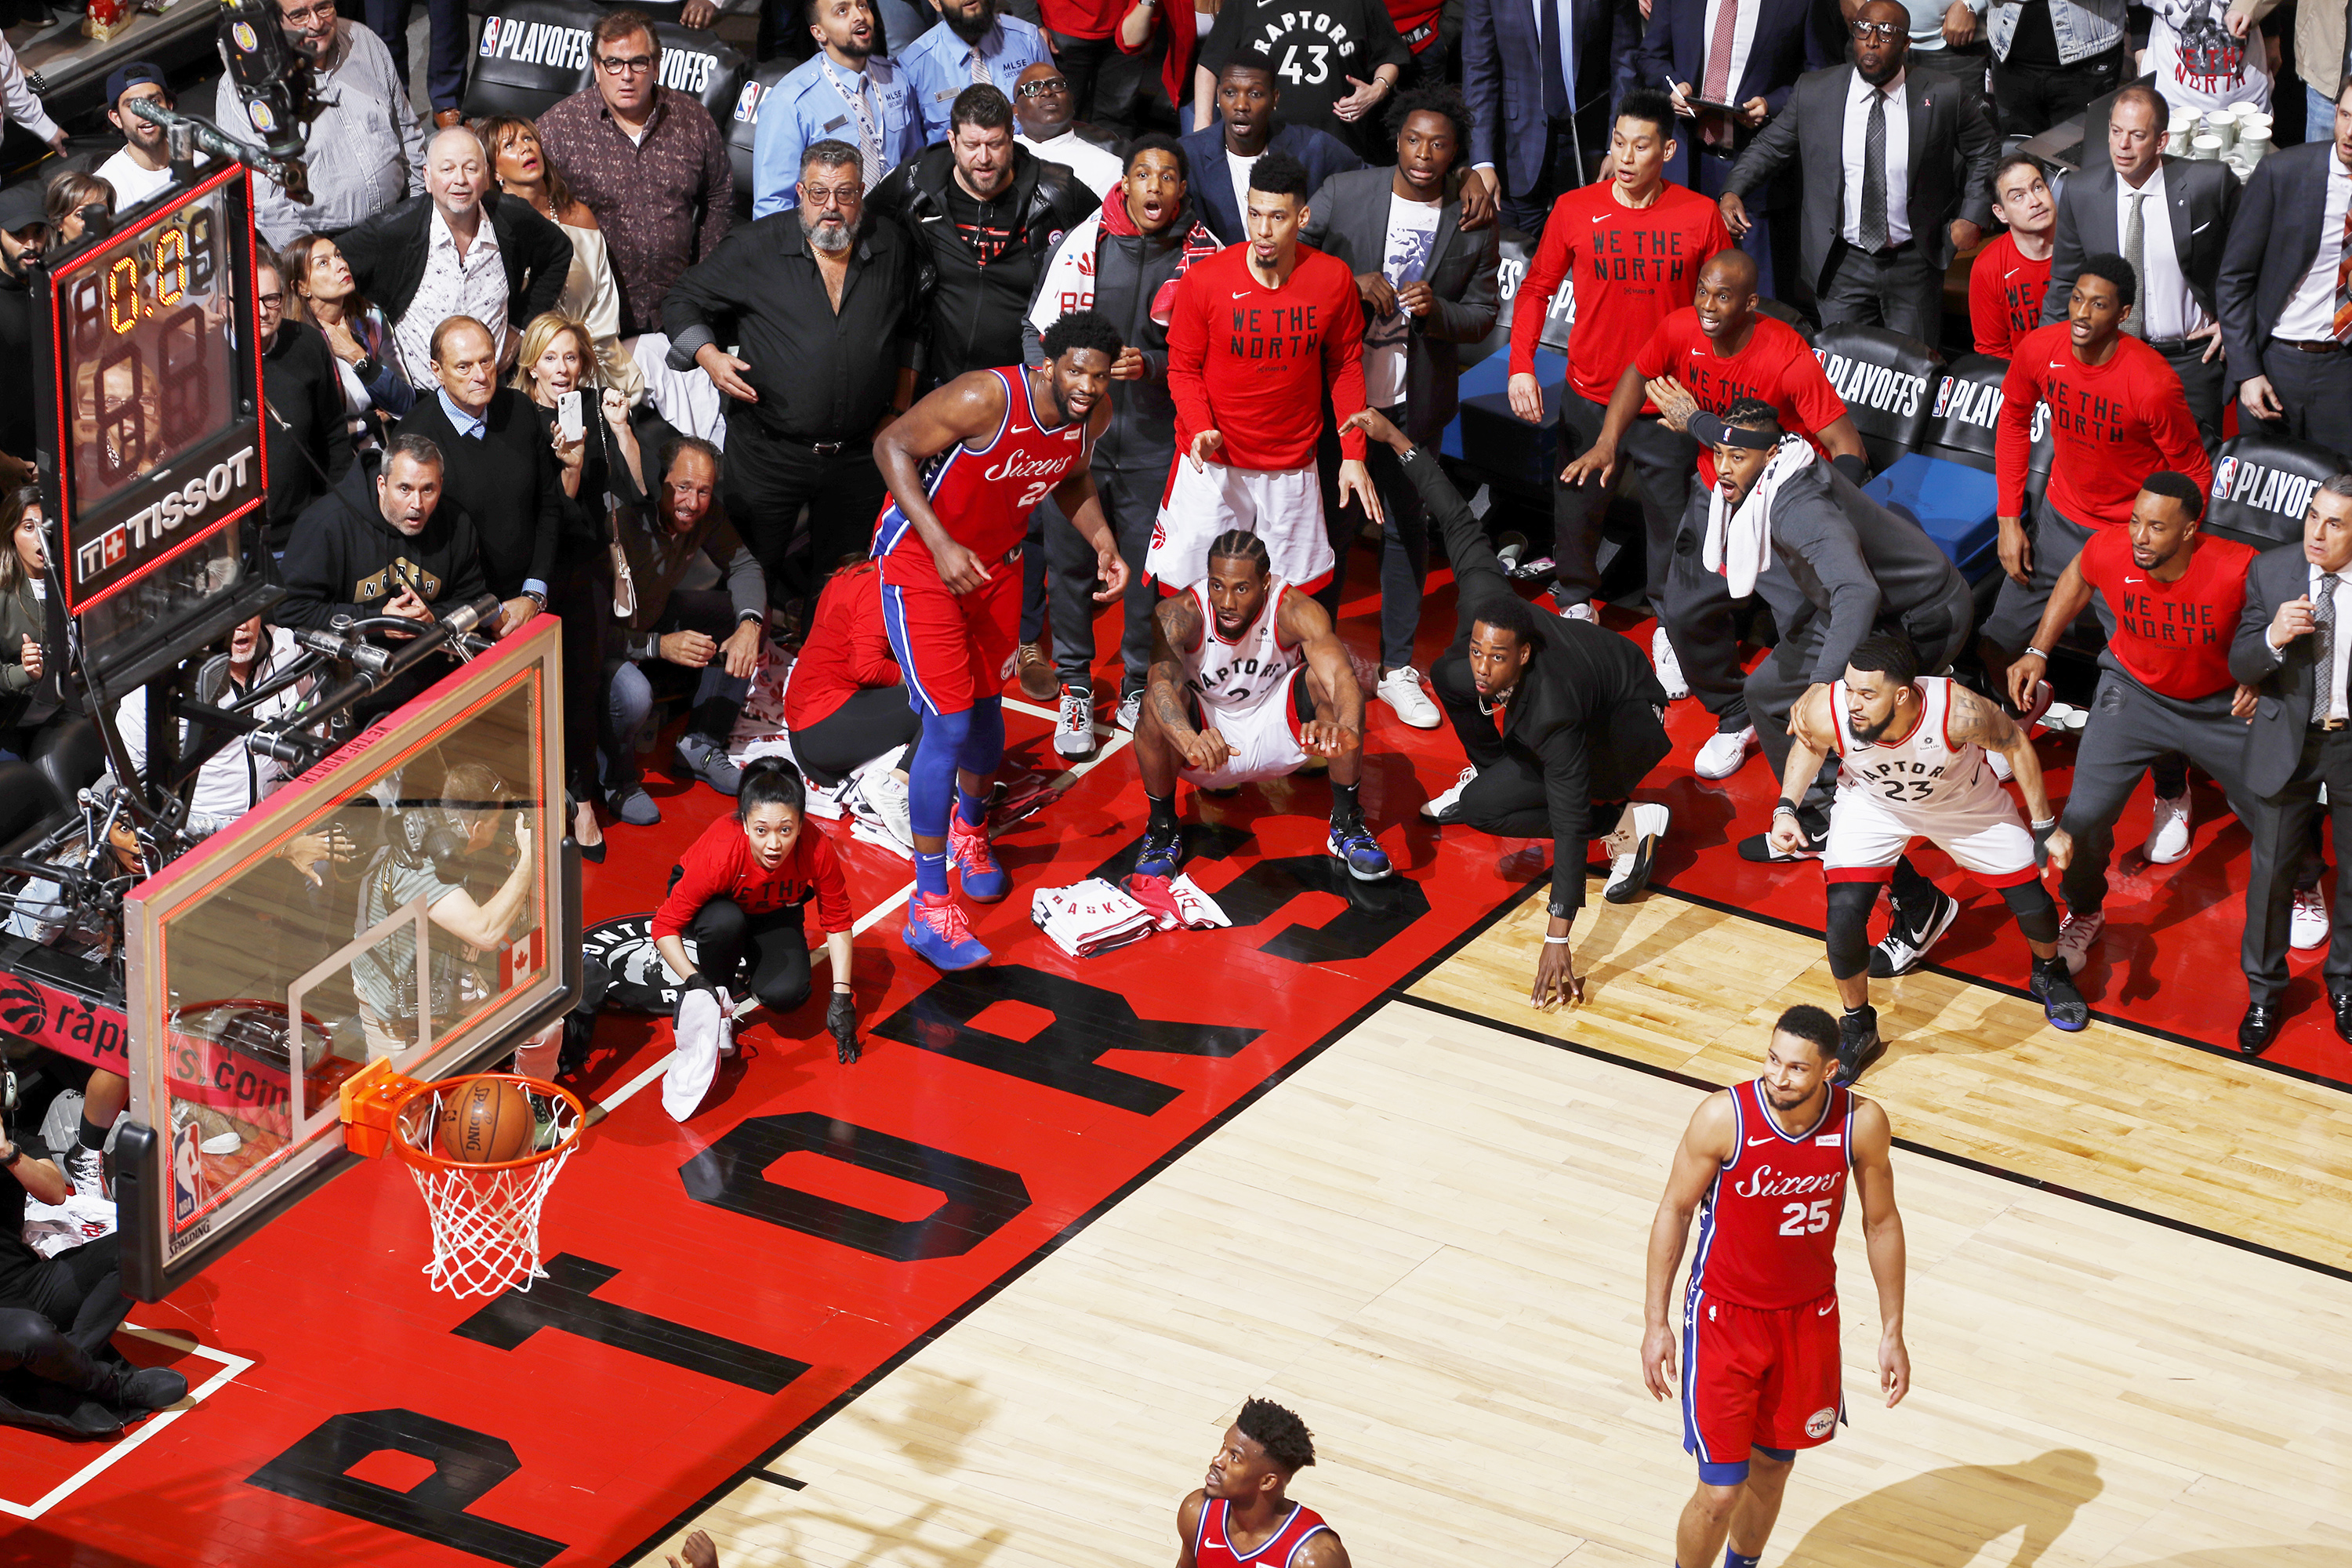 One of those game-seven photos of all the Raptors anxiously watching a ball go through the net.